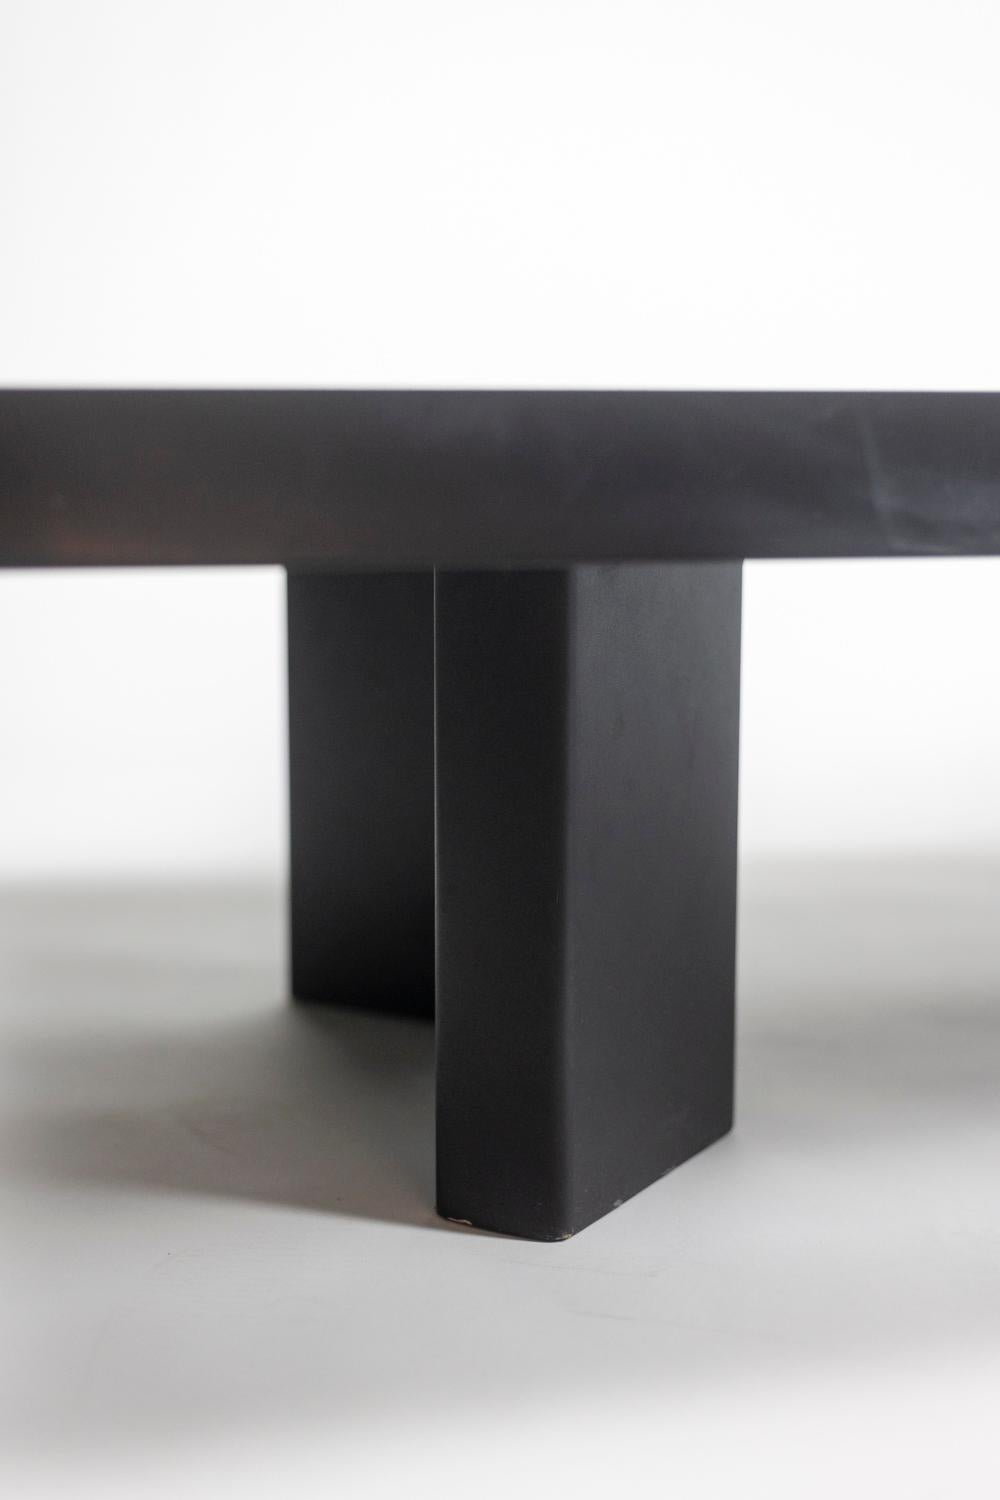 20th Century Perriand for Cassina. Coffee table model “Plana”. 1990s. For Sale